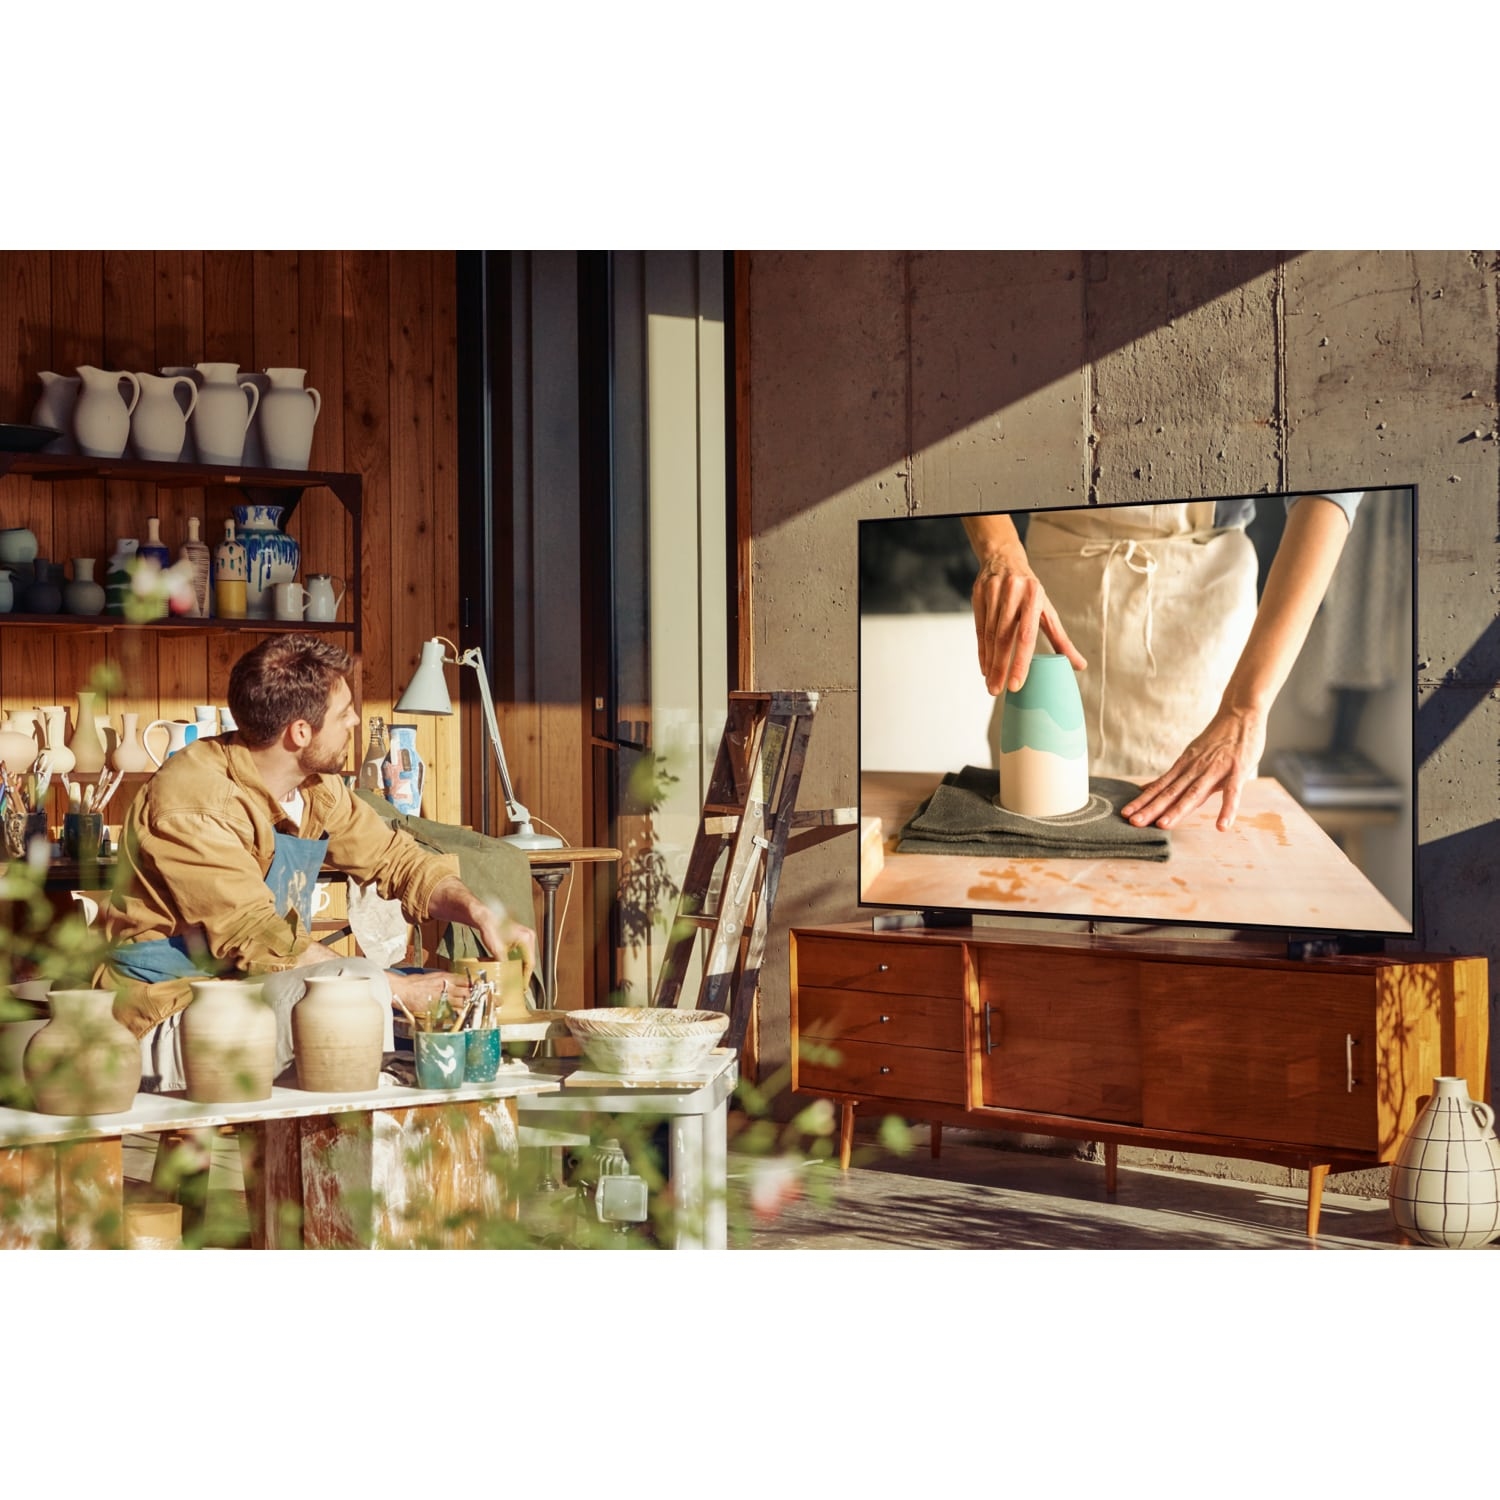 Samsung UE43AU8000KXXU 43" 4K UHD HDR Smart TV HDR powered by HDR10+ with Dynamic Crystal Colour and Air Slim Design - 3